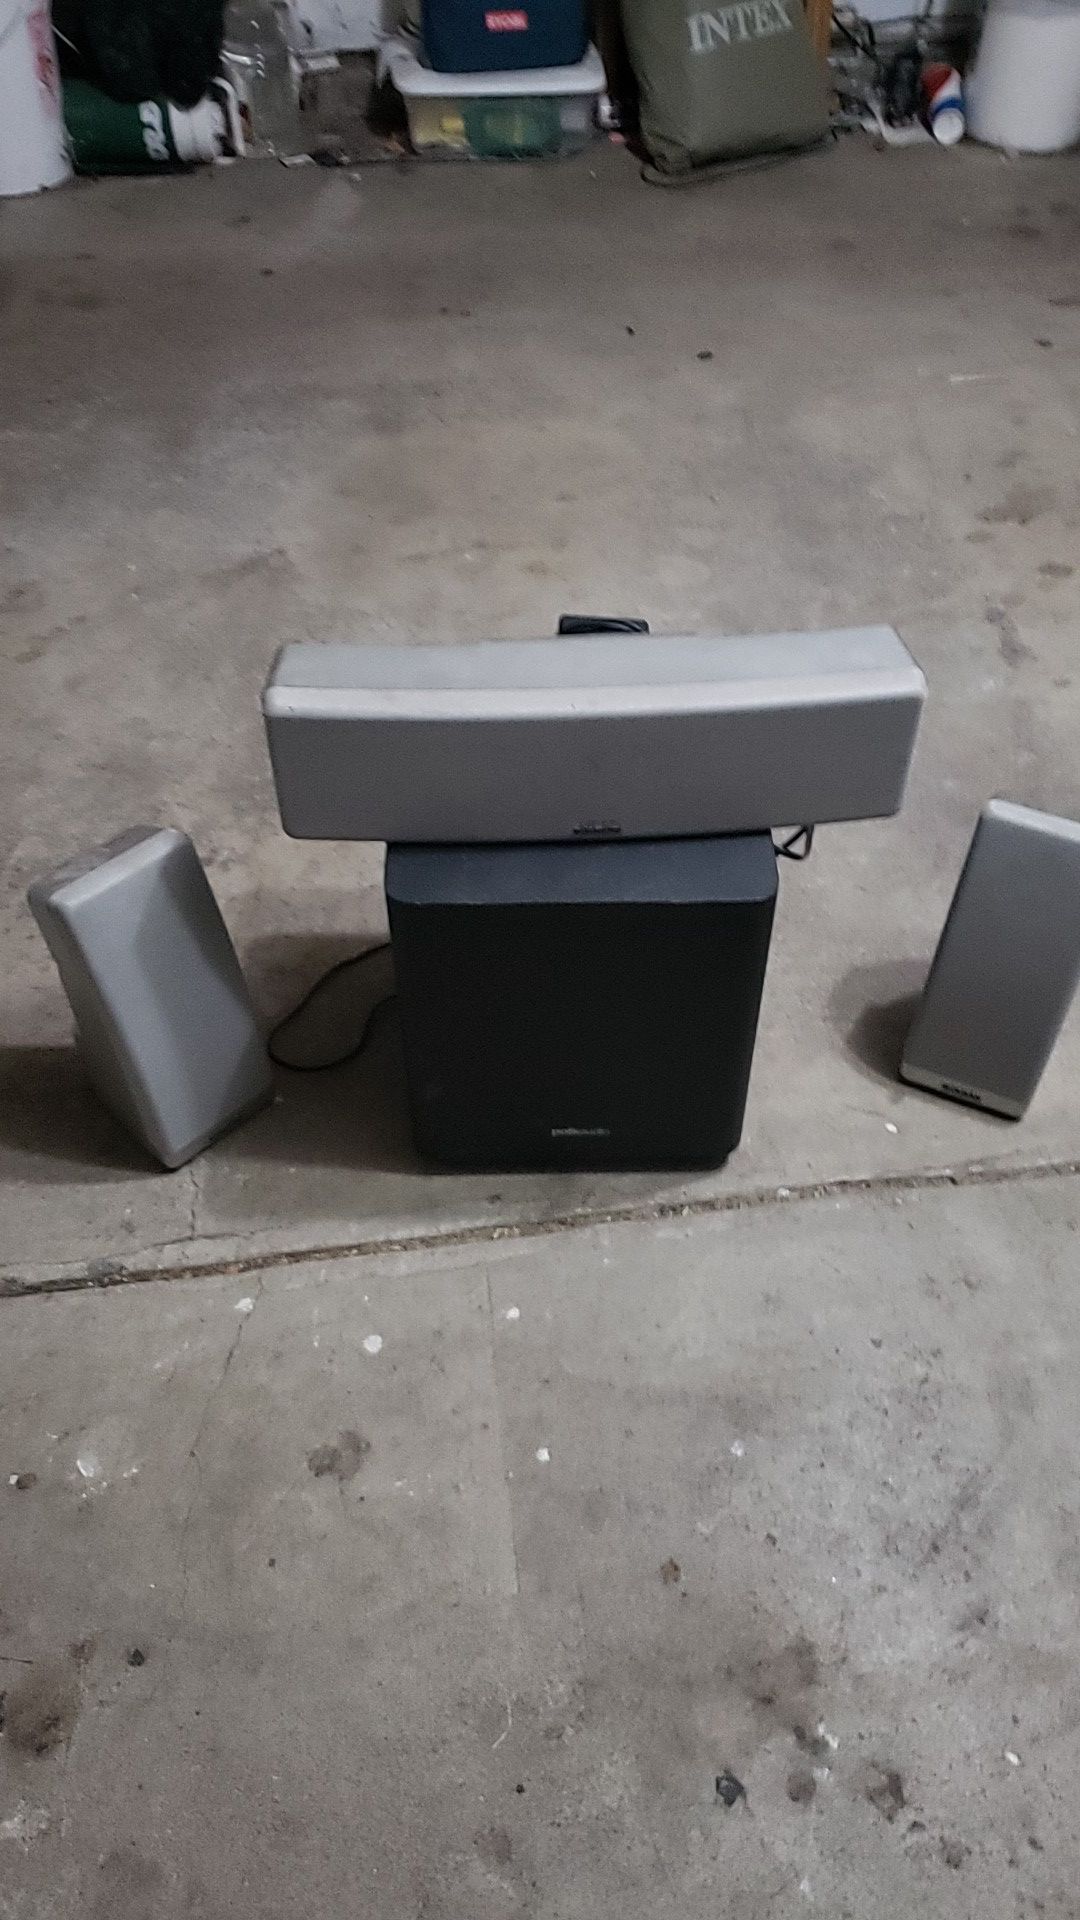 Price drop!! Surround sound speakers with wireless subwoofer